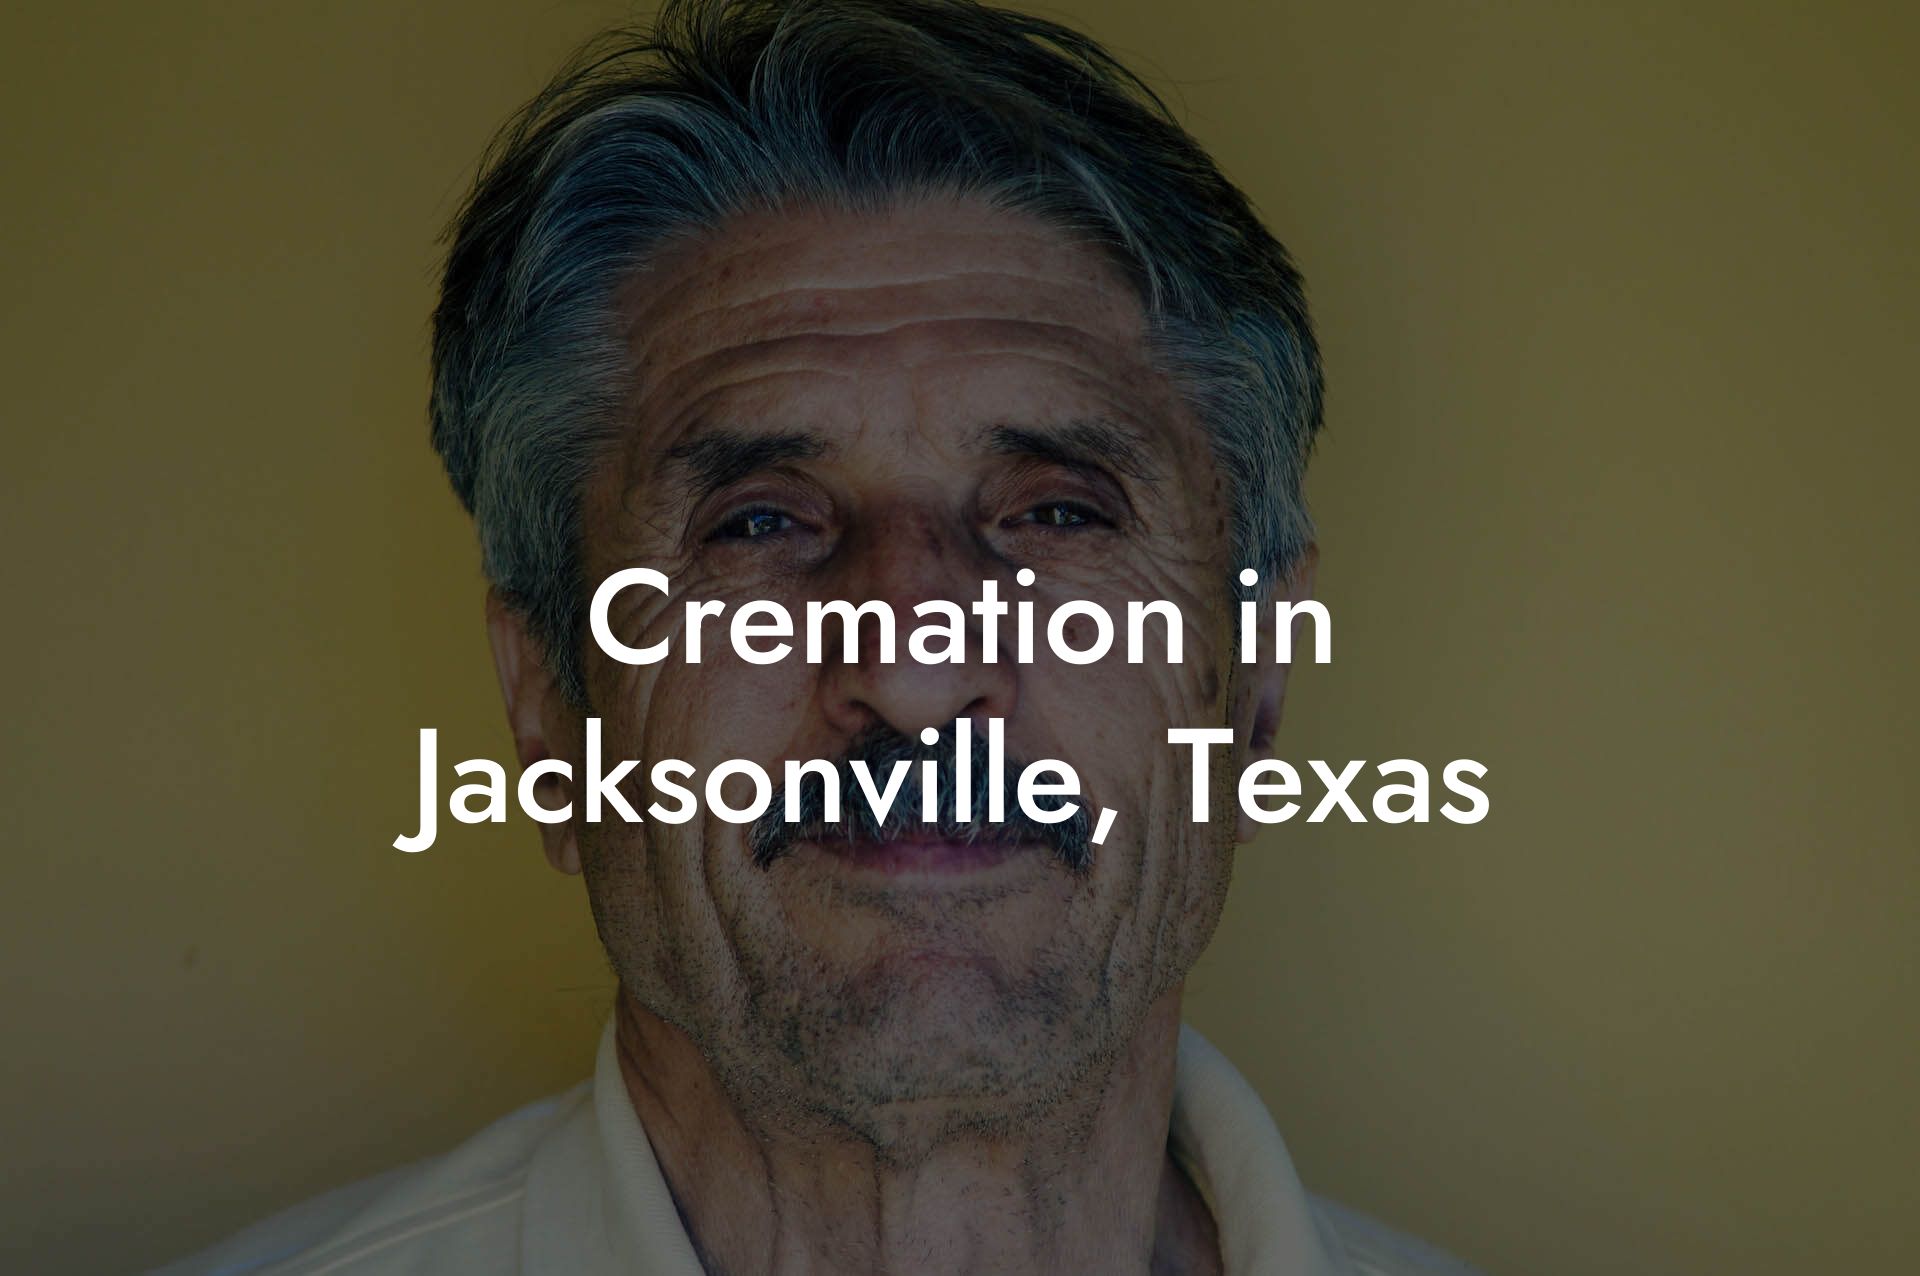 Cremation in Jacksonville, Texas